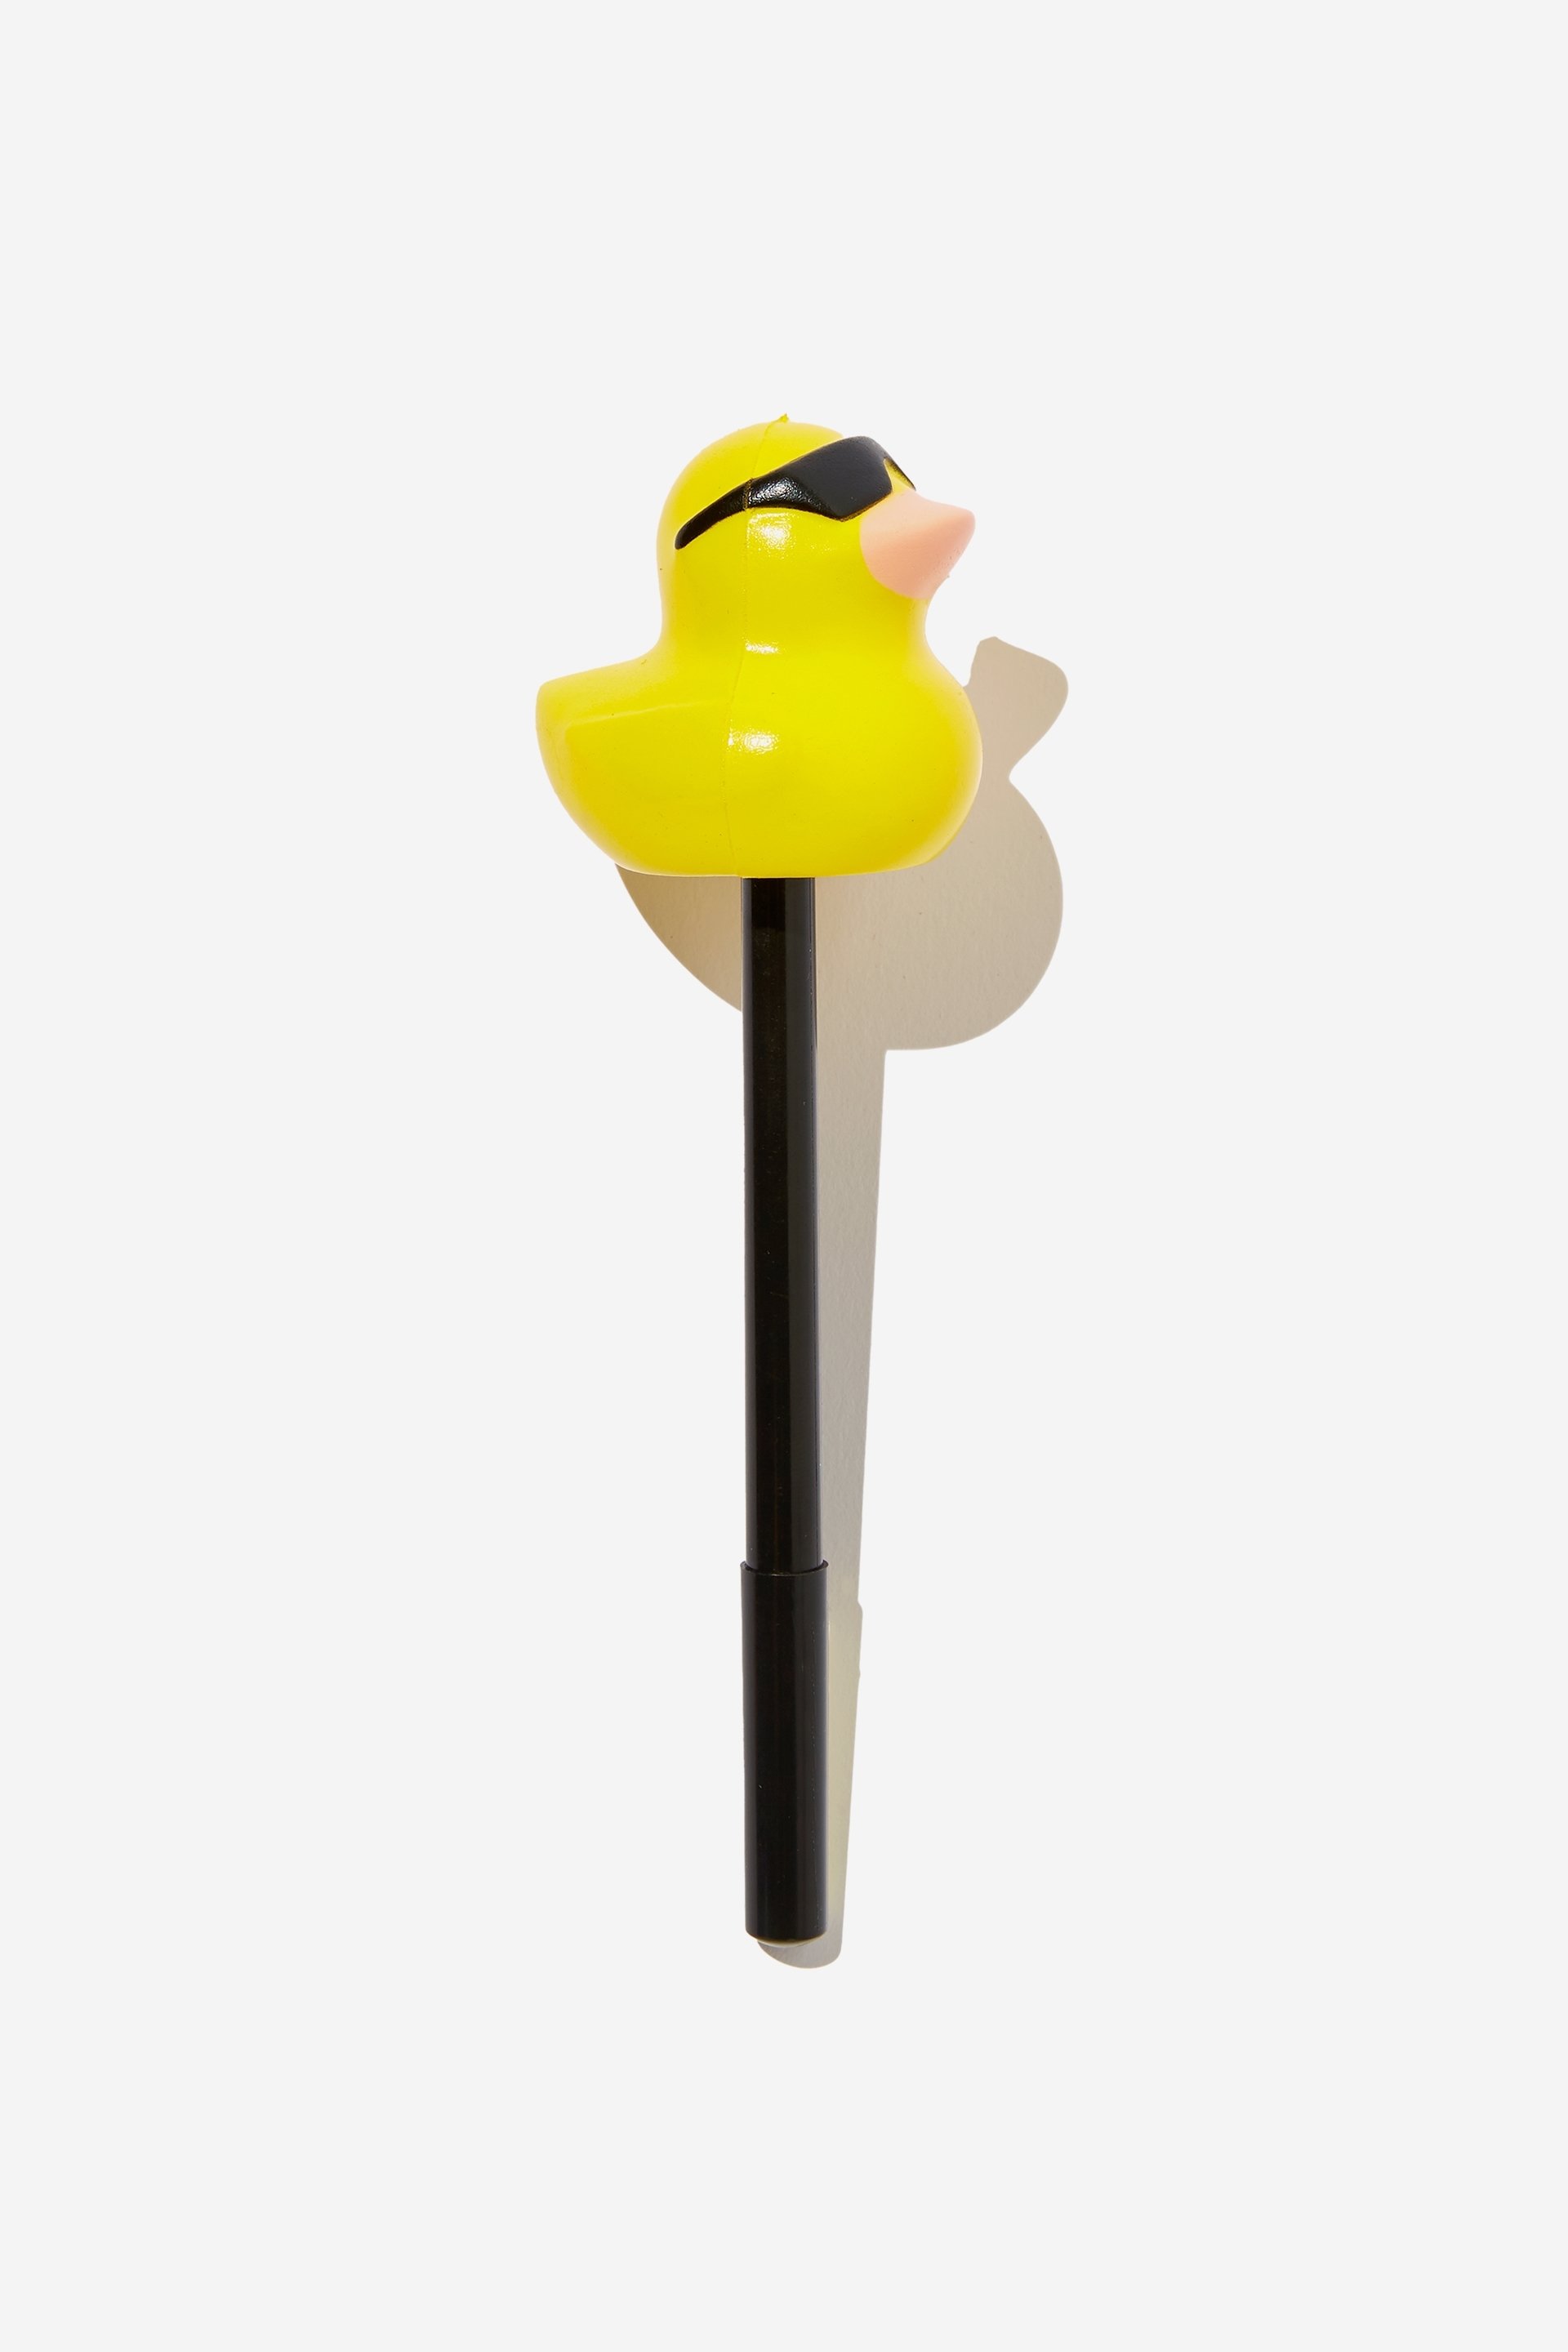 Typo - The Squishy Pen - Cool rubber ducky